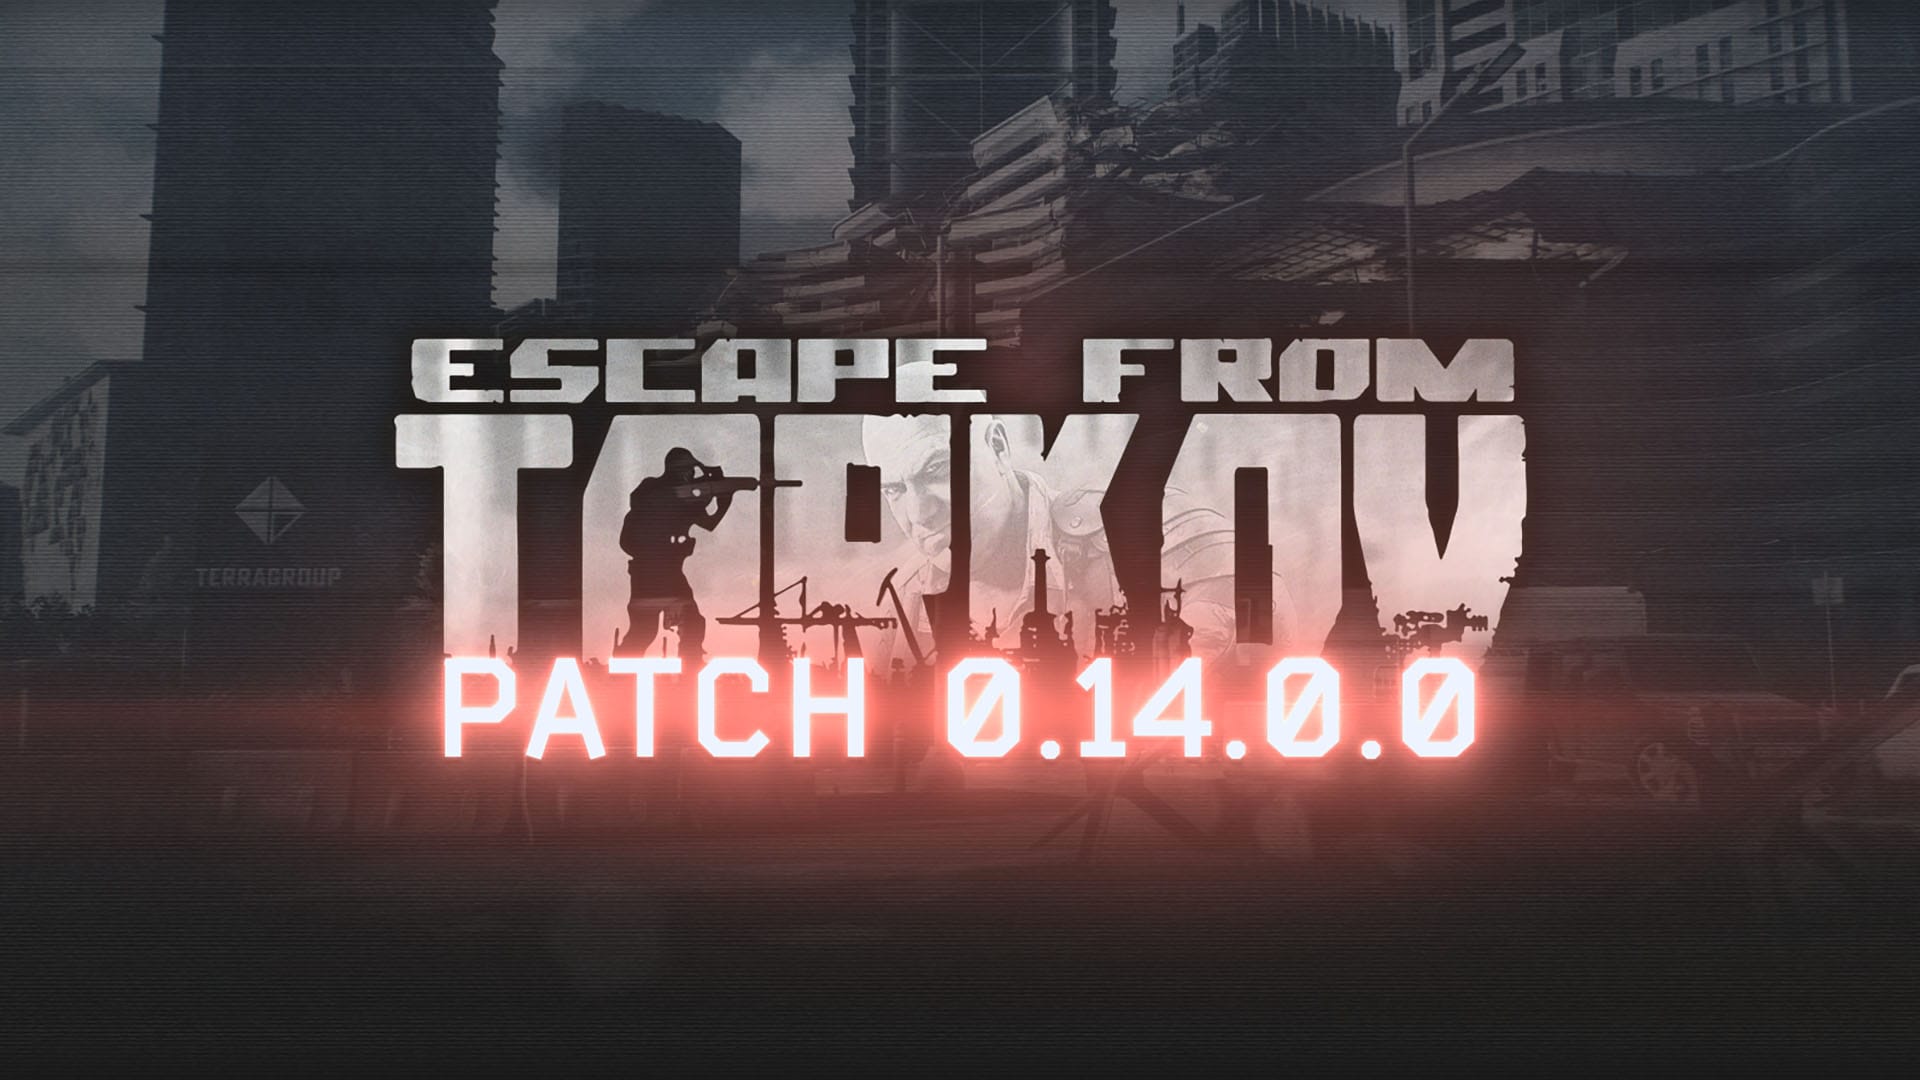 Escape from Tarkov Patch 0.14.0.0 Brings New Location for Beginners, Achievements, Weapons, and More